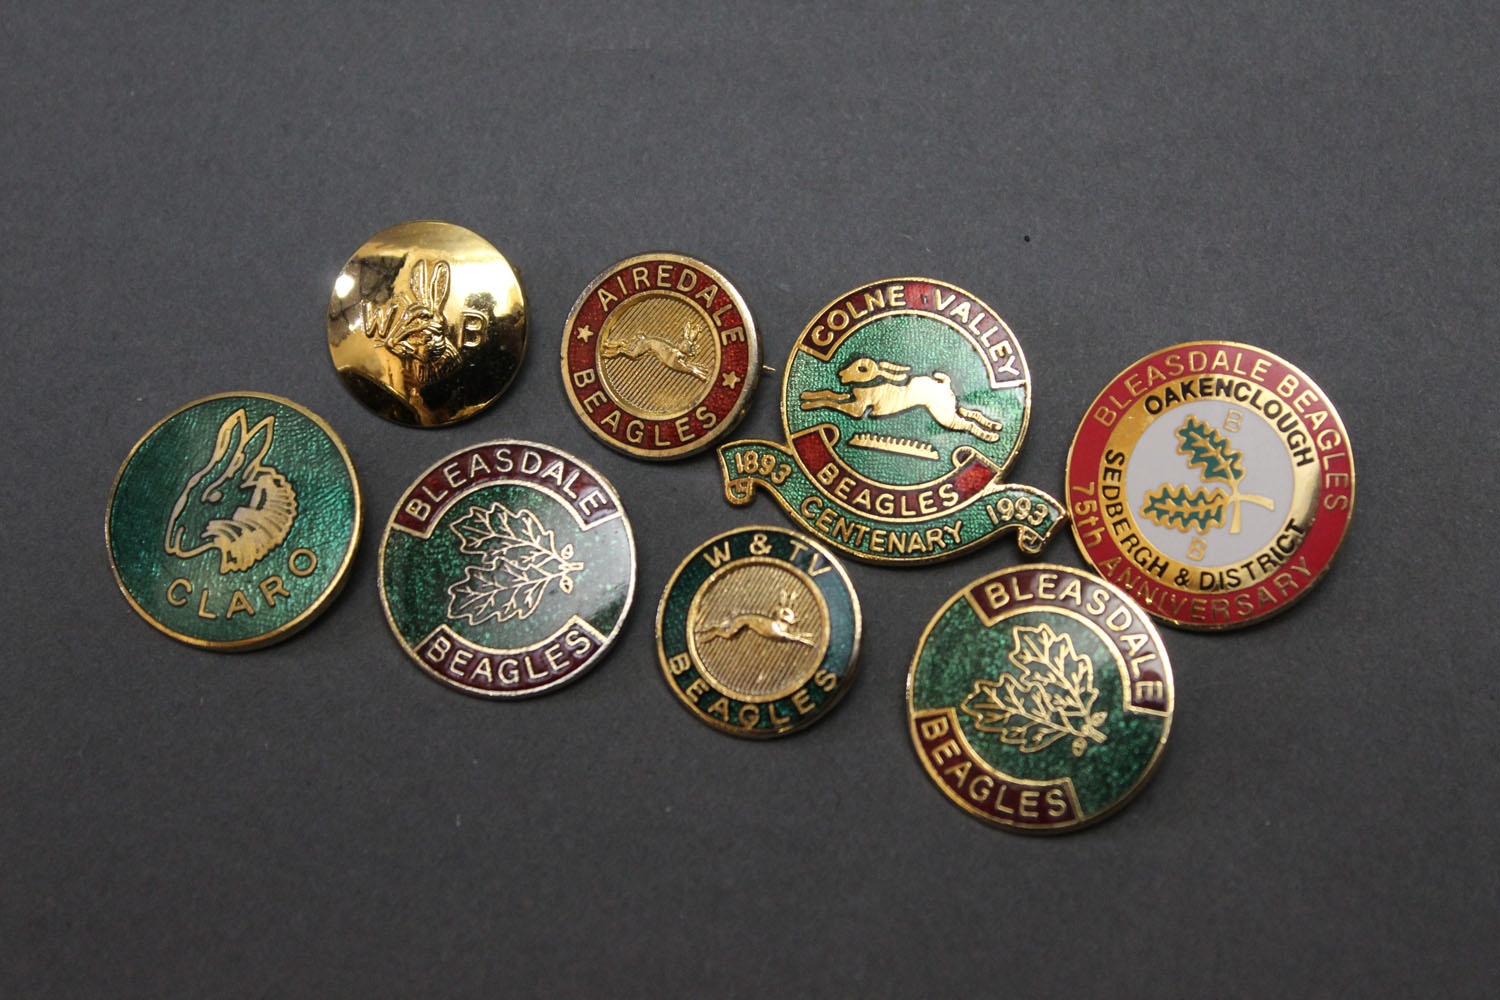 Eight beagle hunt badges, to include Airedale Beagles, Bleasdale, Colne Valley, etc.